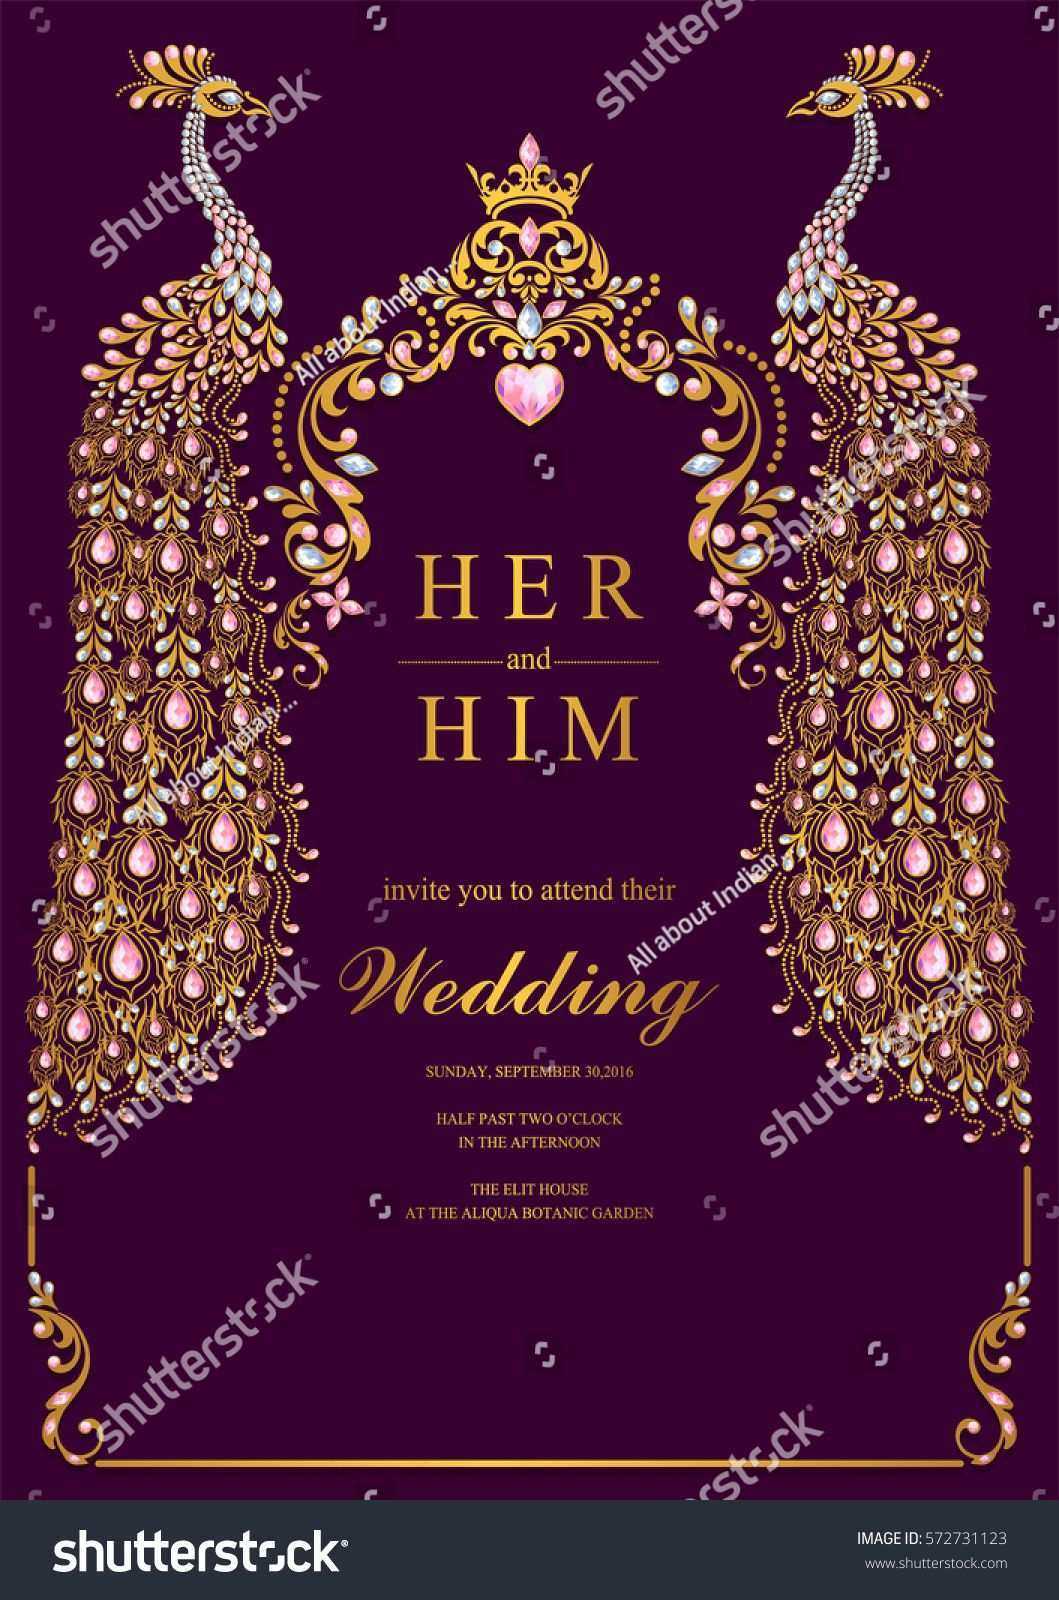 42 Online Indian Wedding Invitation Template In Word With Within Indian Wedding Cards Design Templates